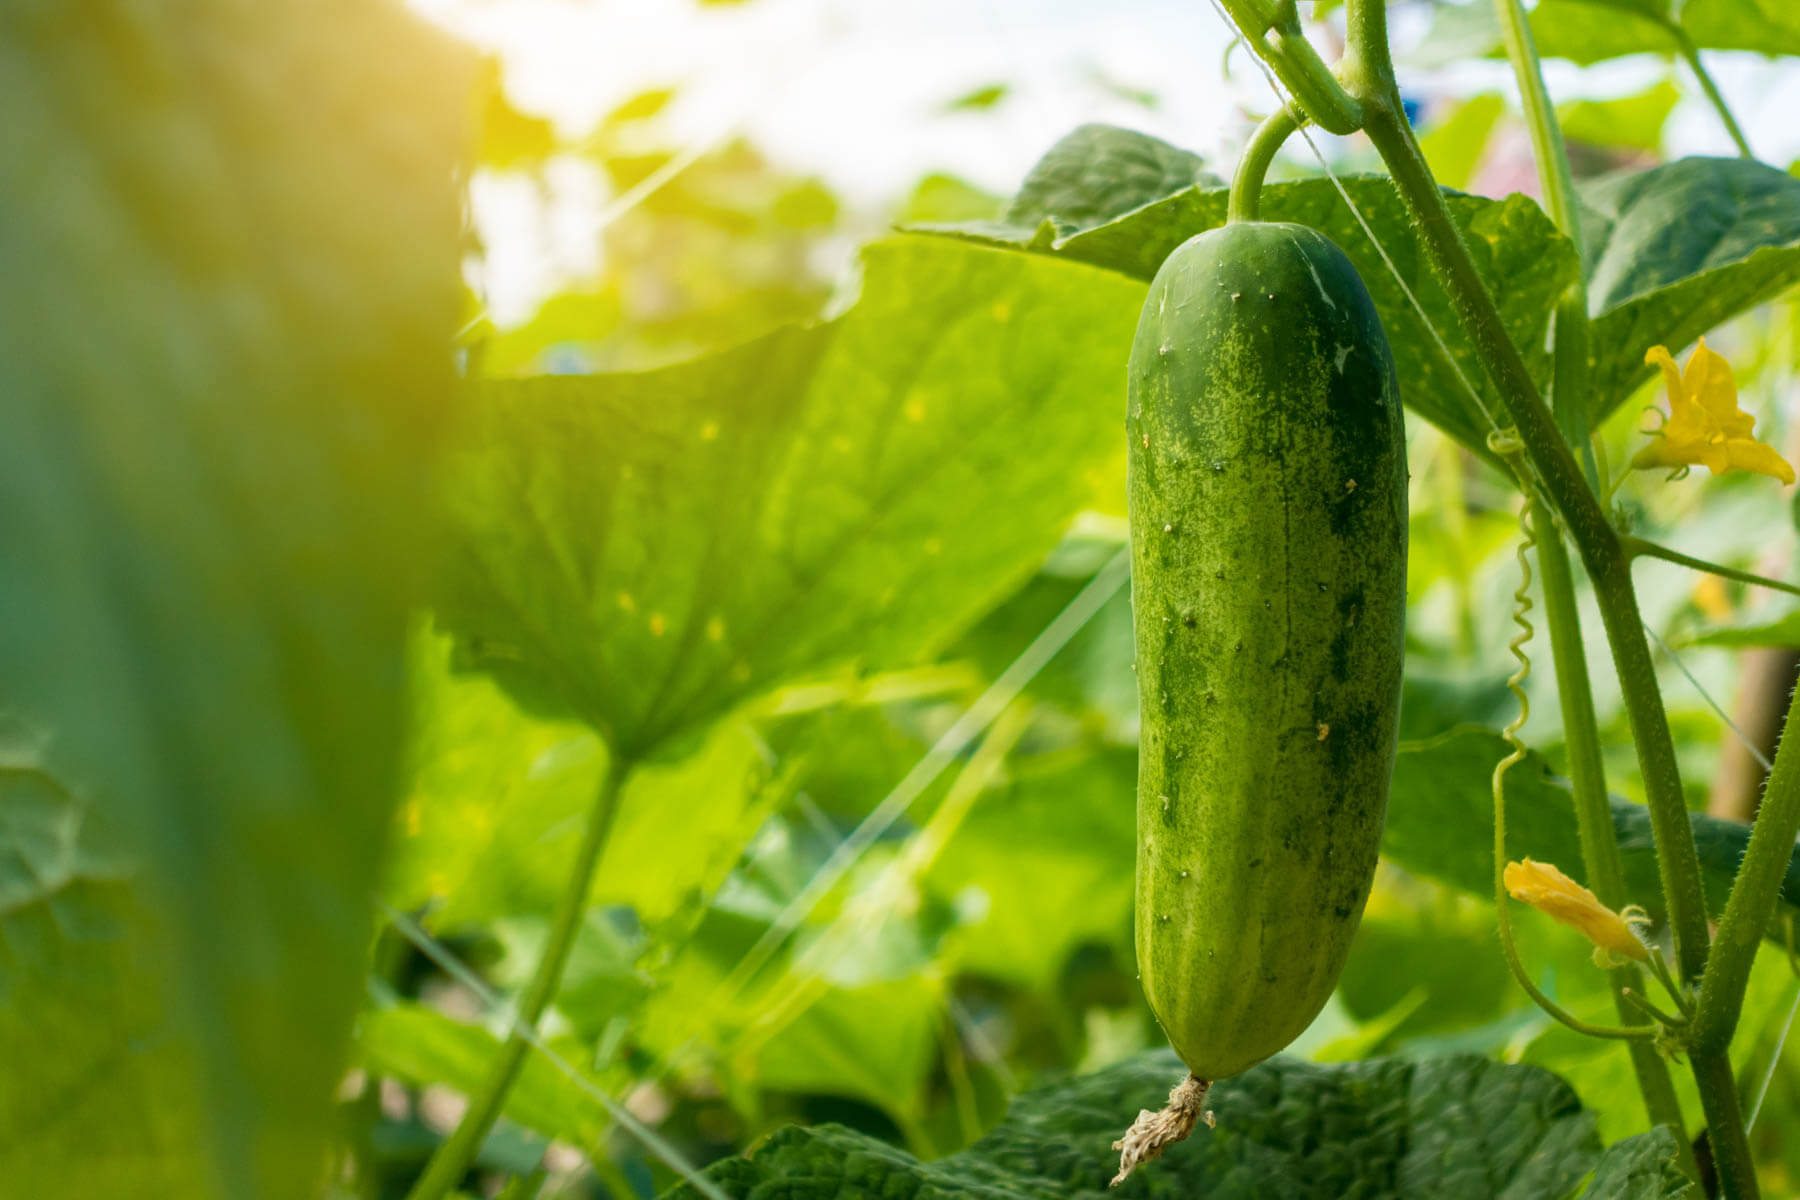 Different Types of Cucumbers to Grow